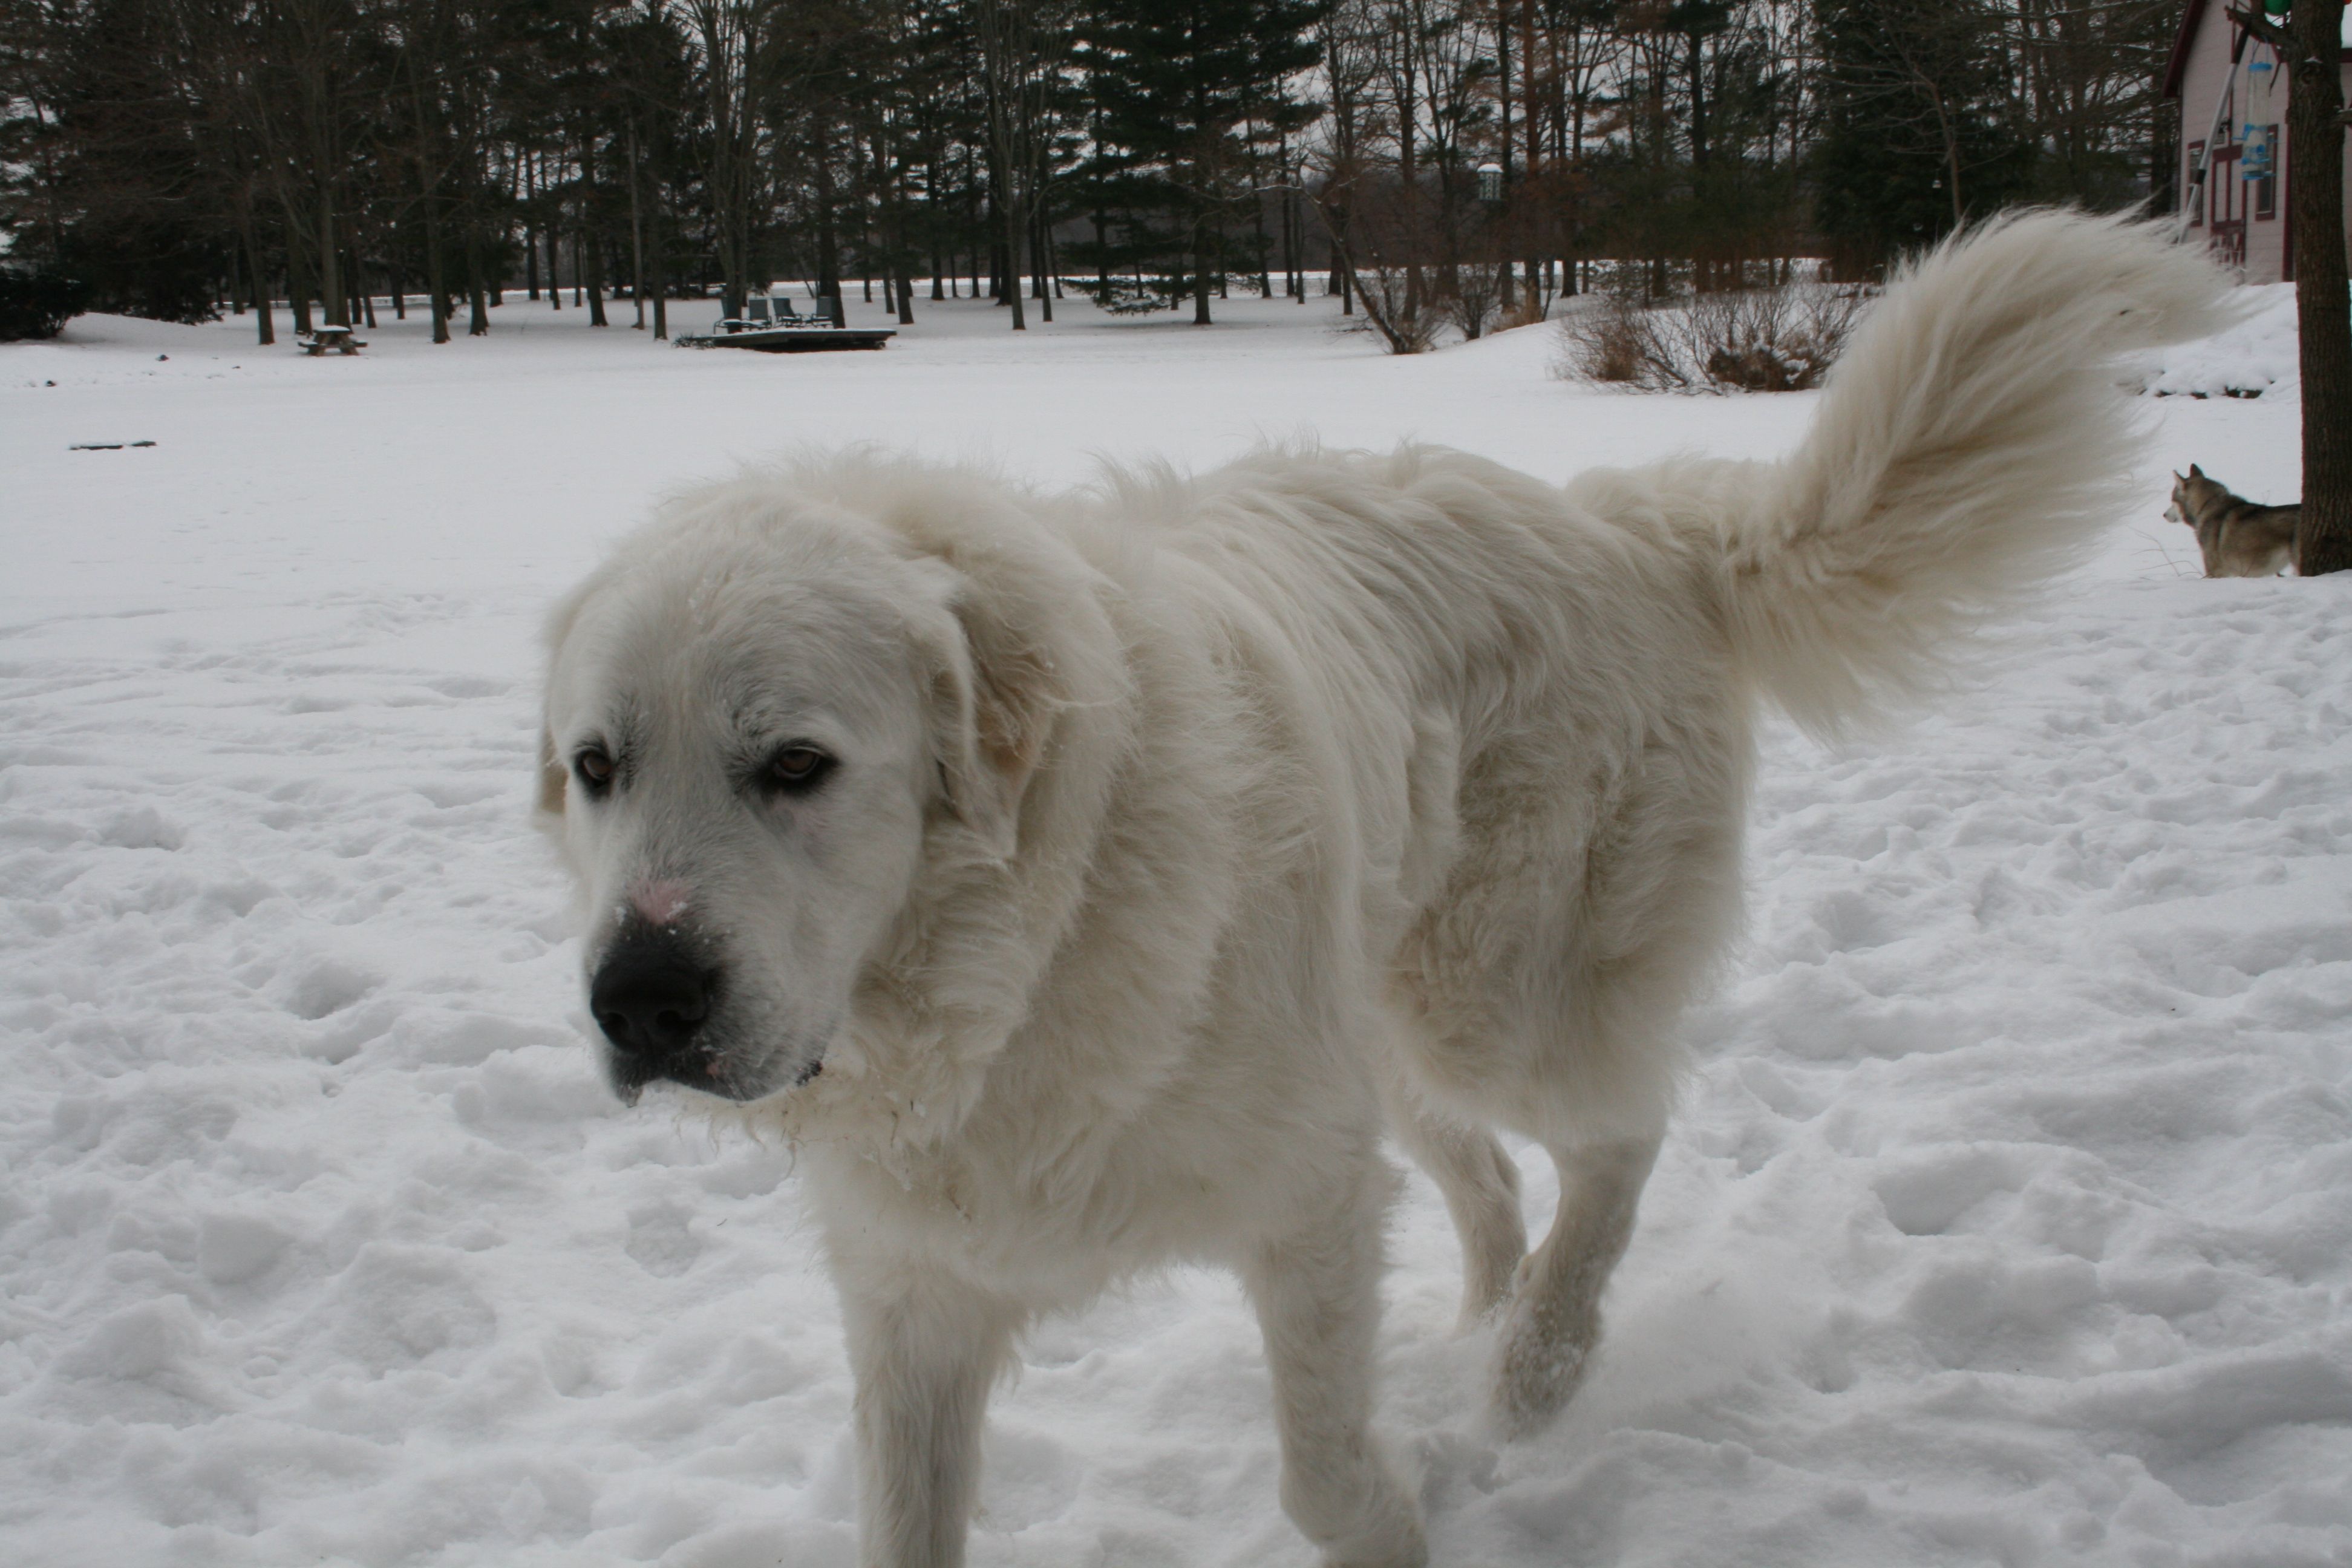 Great Pyrenees dog in the snow photo and wallpaper. Beautiful Great Pyrenees dog in the snow picture